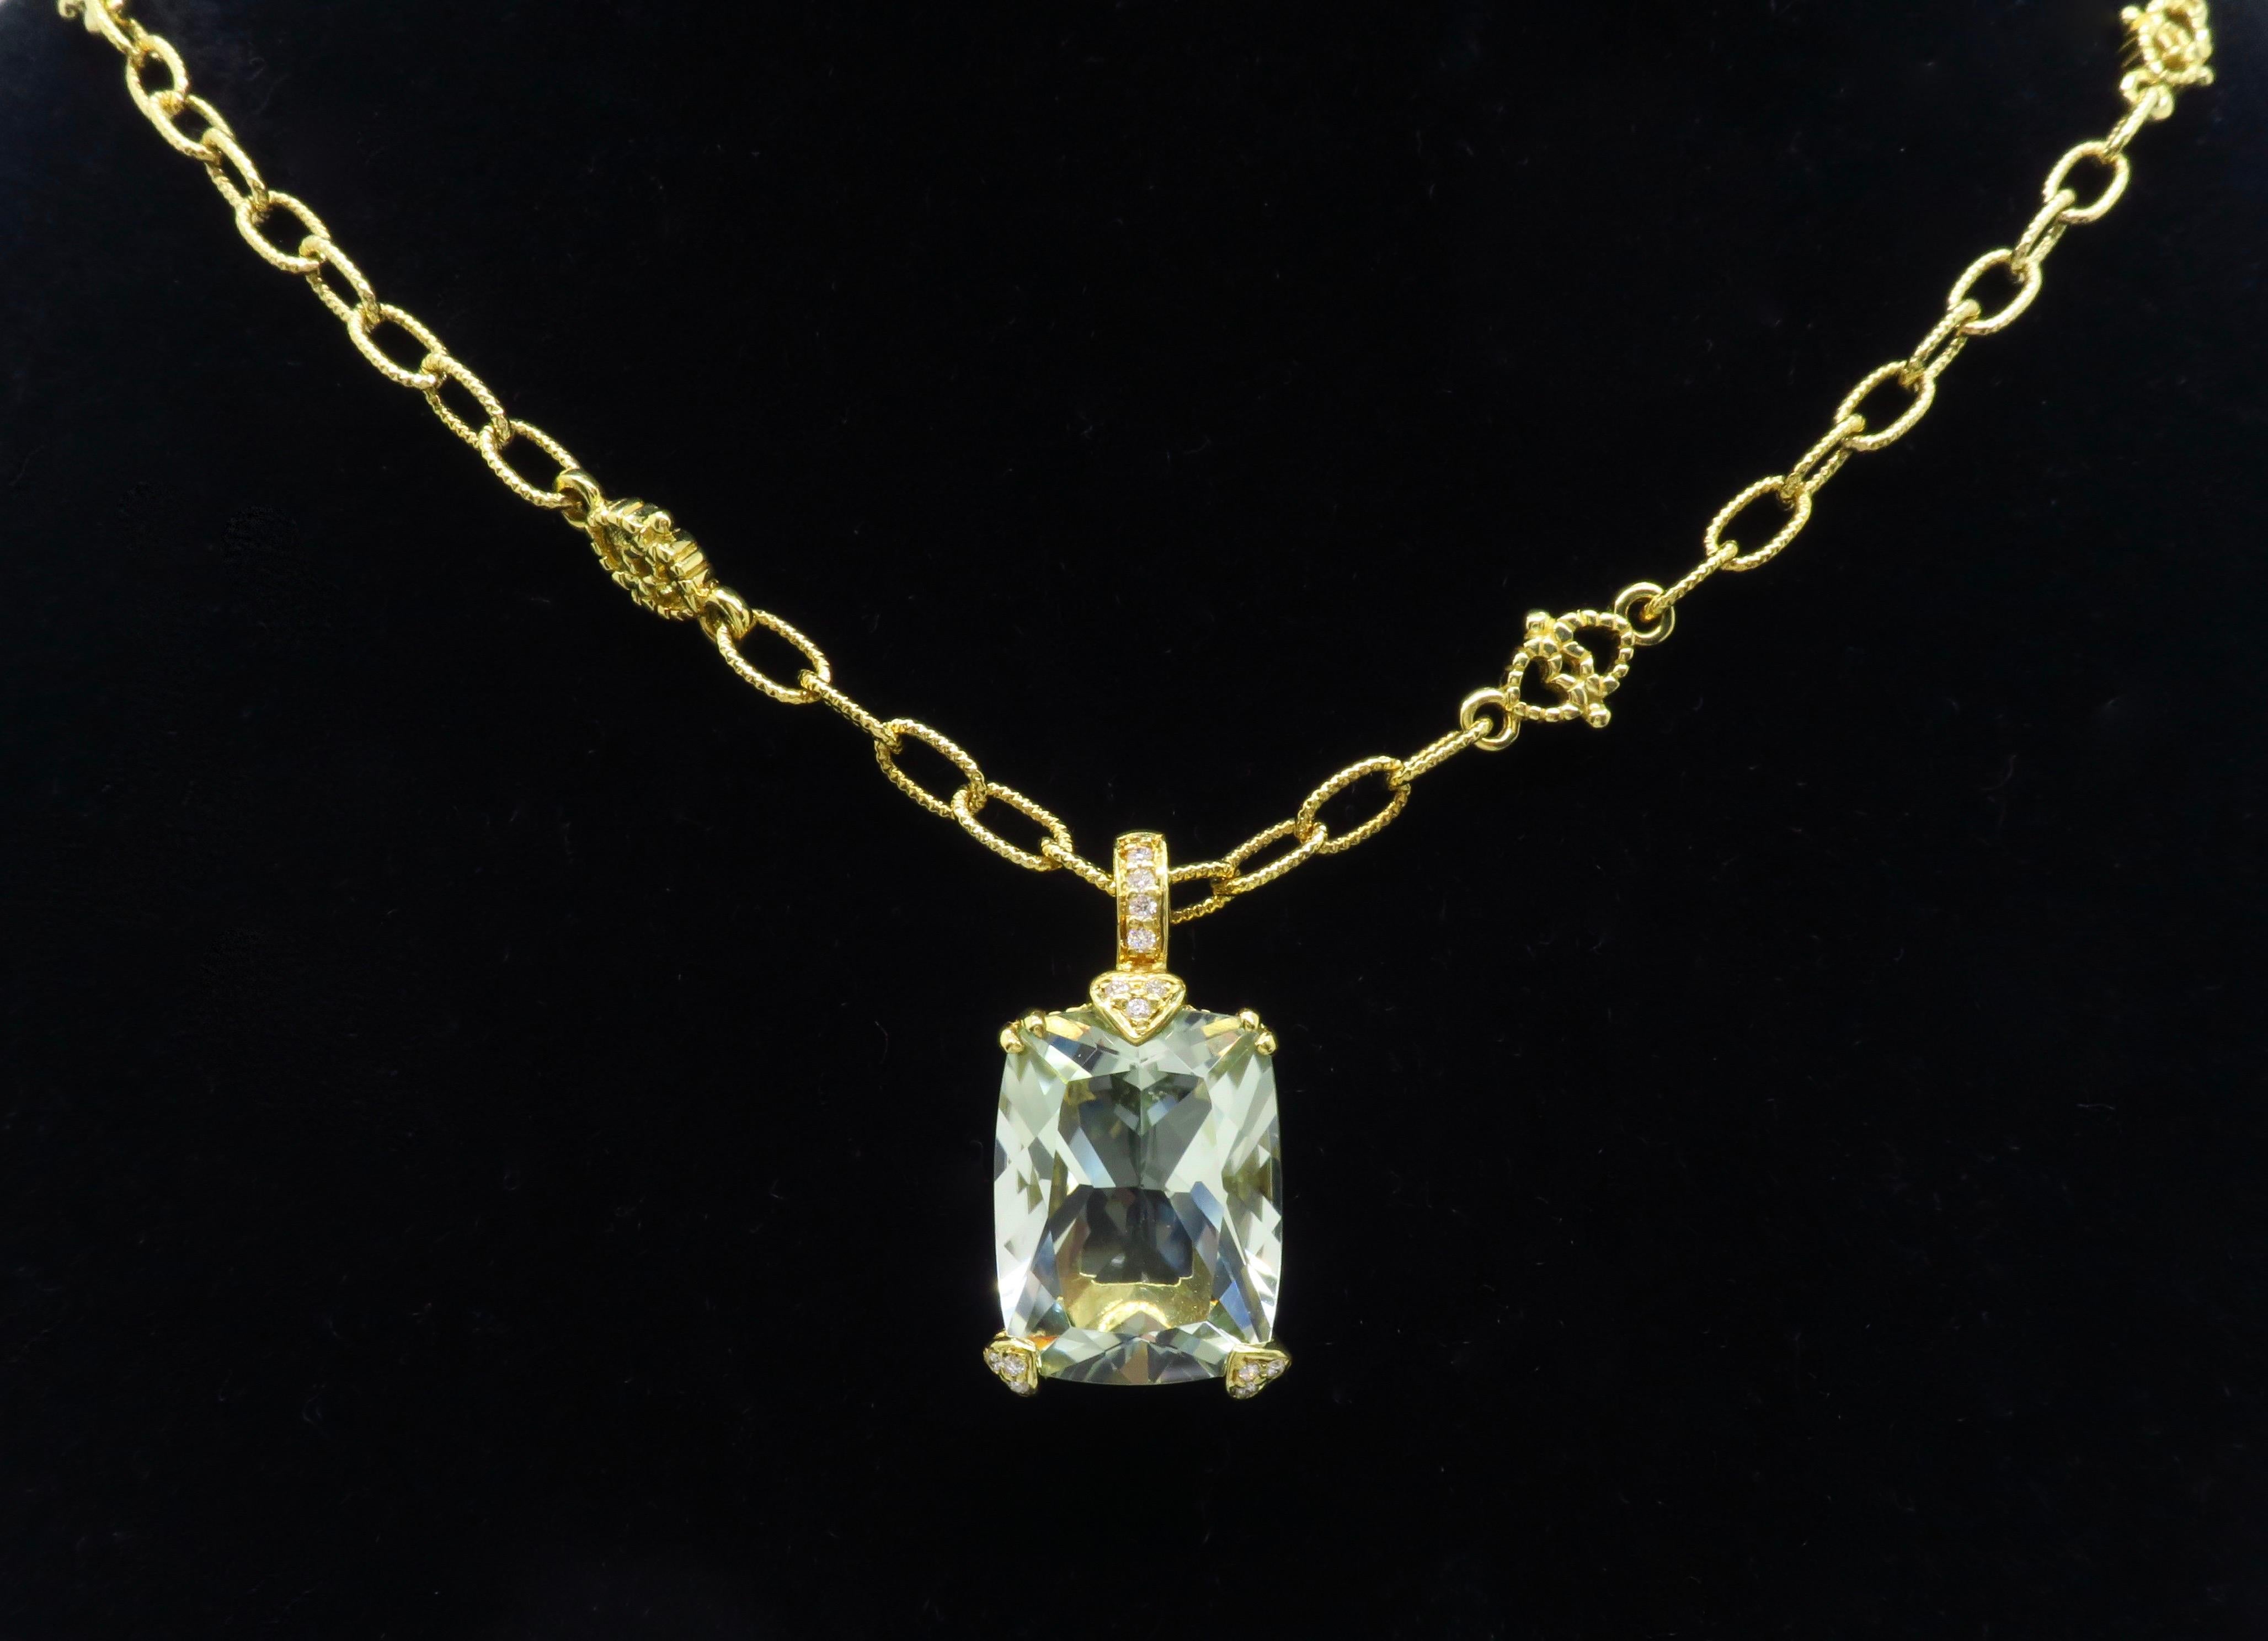 Women's or Men's Green Amethyst and Diamond Pendant Necklace in 18 Karat Yellow Gold